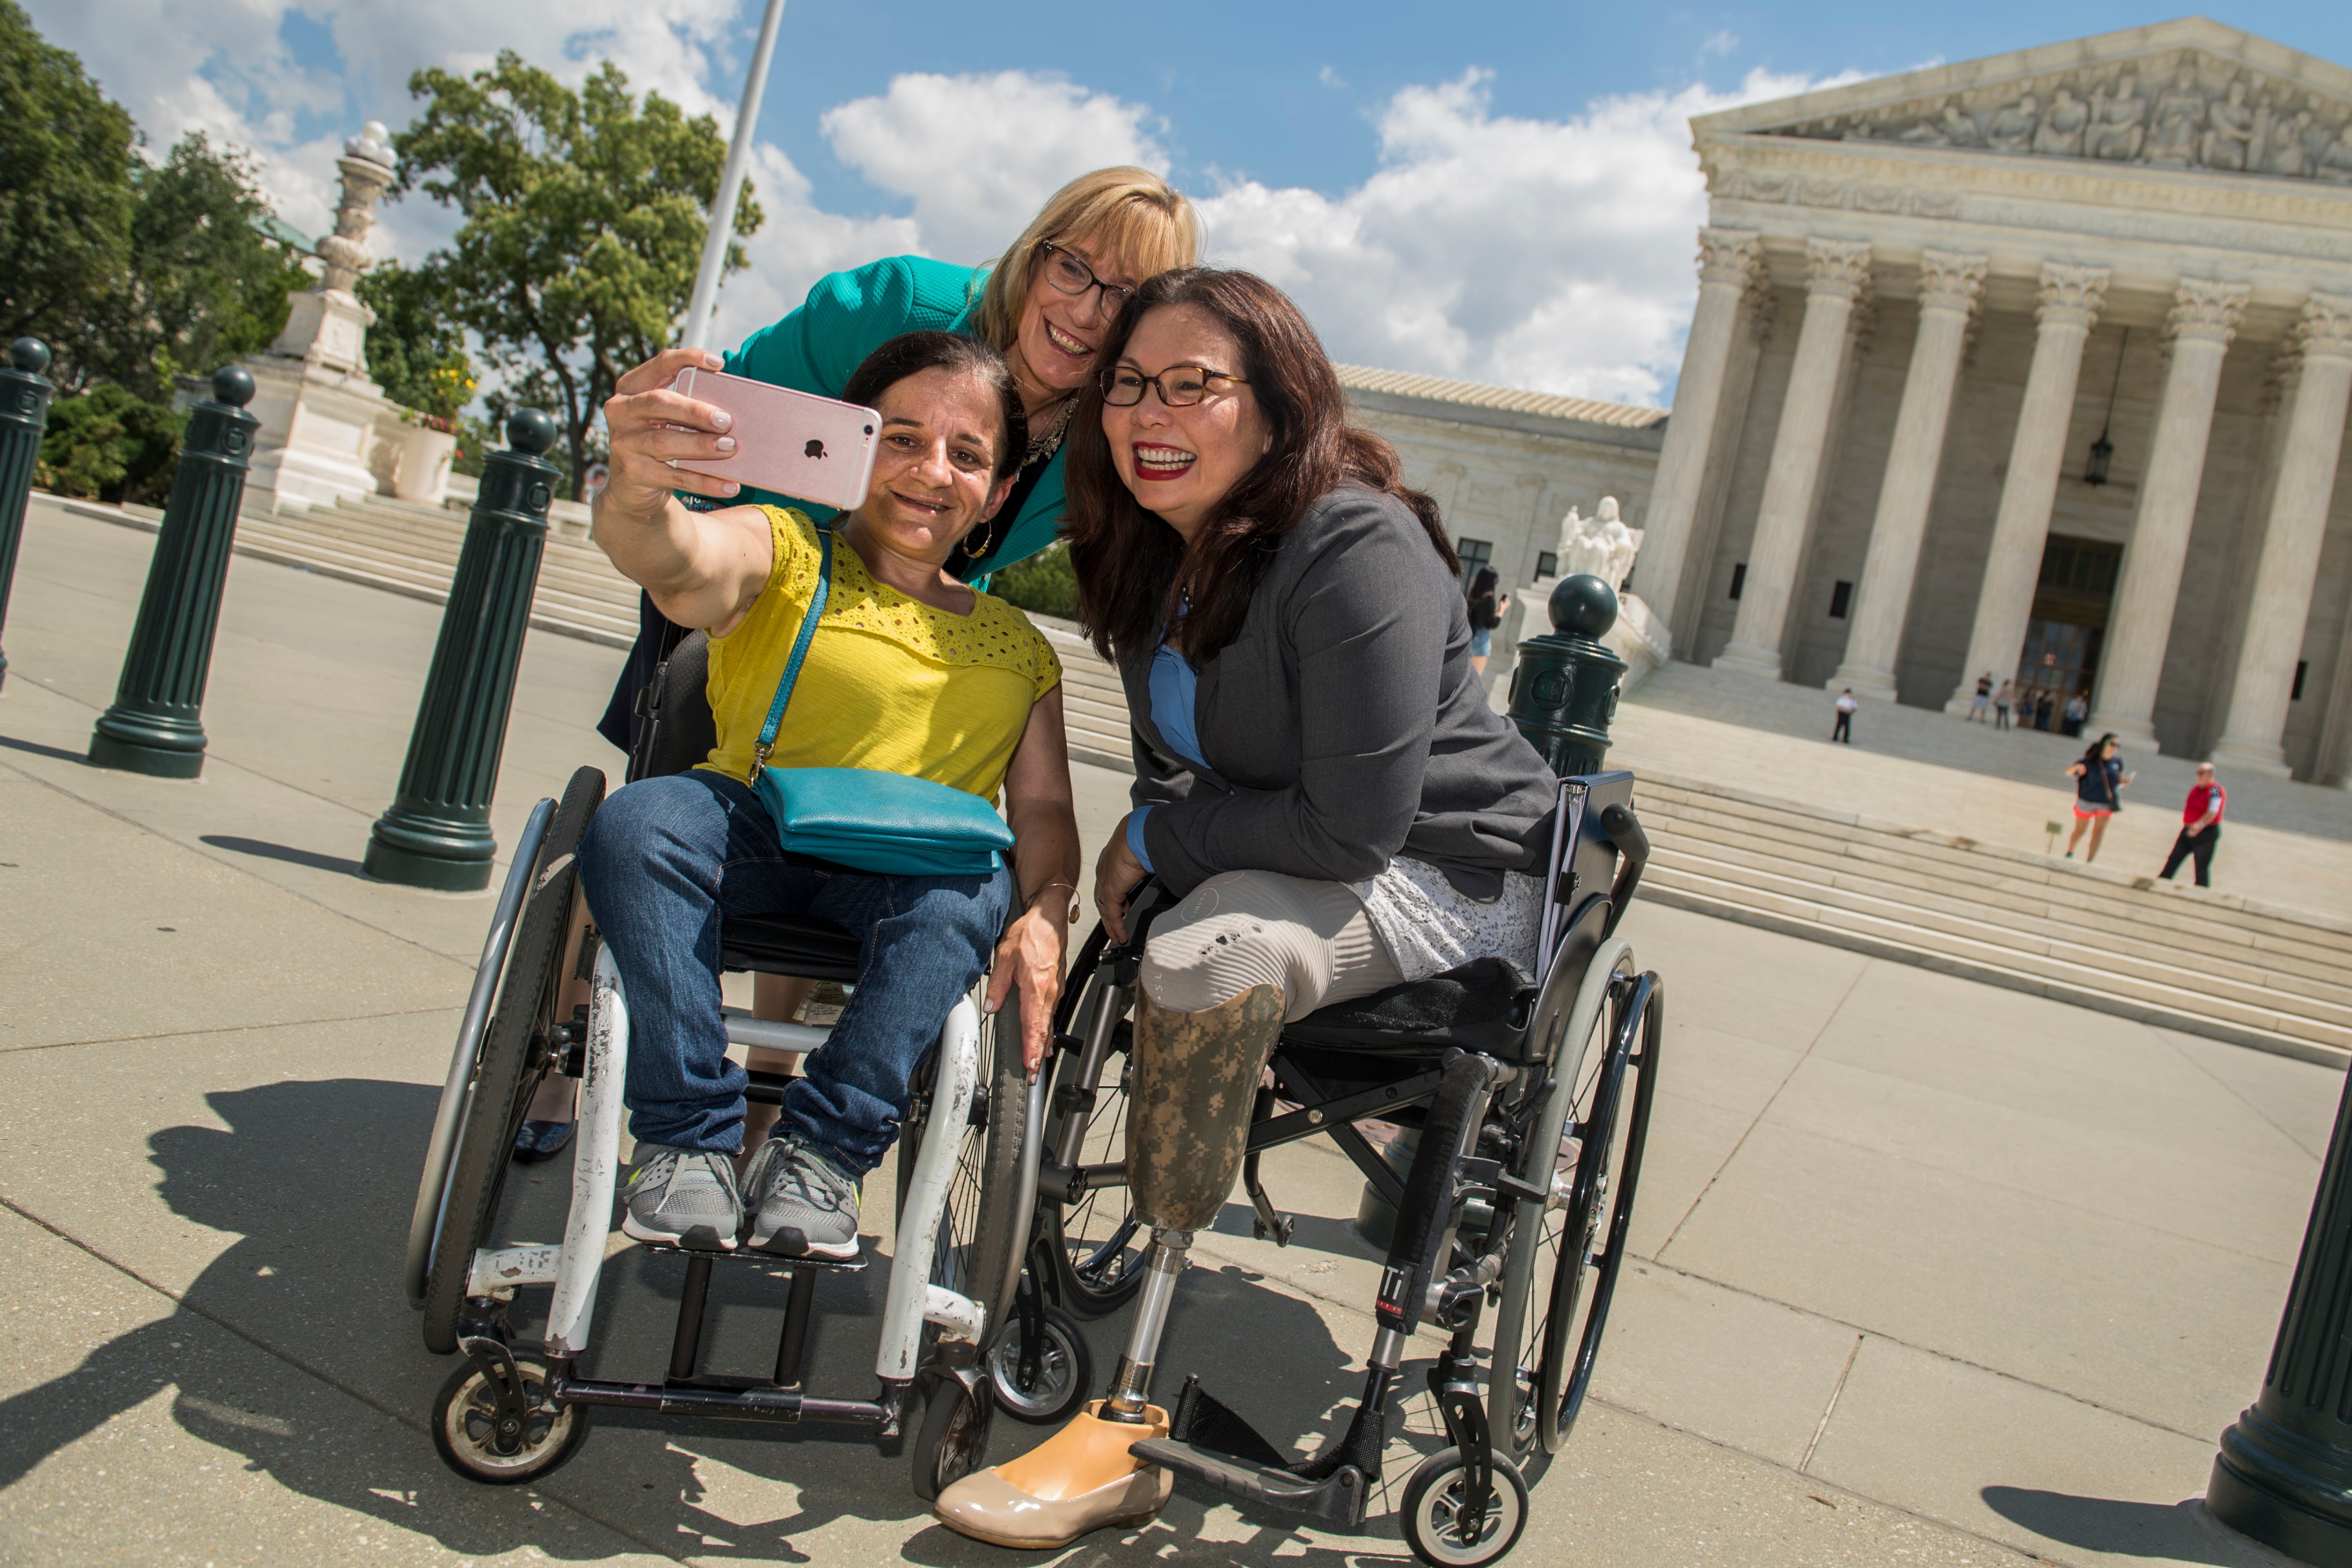 Sens. Tammy Duckworth, D-Ill., right, Maggie Hassan, D-N.H., and Colleen Flanagan of Disability Action for America, take a selfie after a news conference outside of the Supreme Court to mark the 27th anniversary of the Americans with Disability Act and oppose Medicaid cuts in the Republicans' healthcare plan on July 26, 2017. (Tom Williams&mdash;CQ-Roll Call, Inc. / Getty)